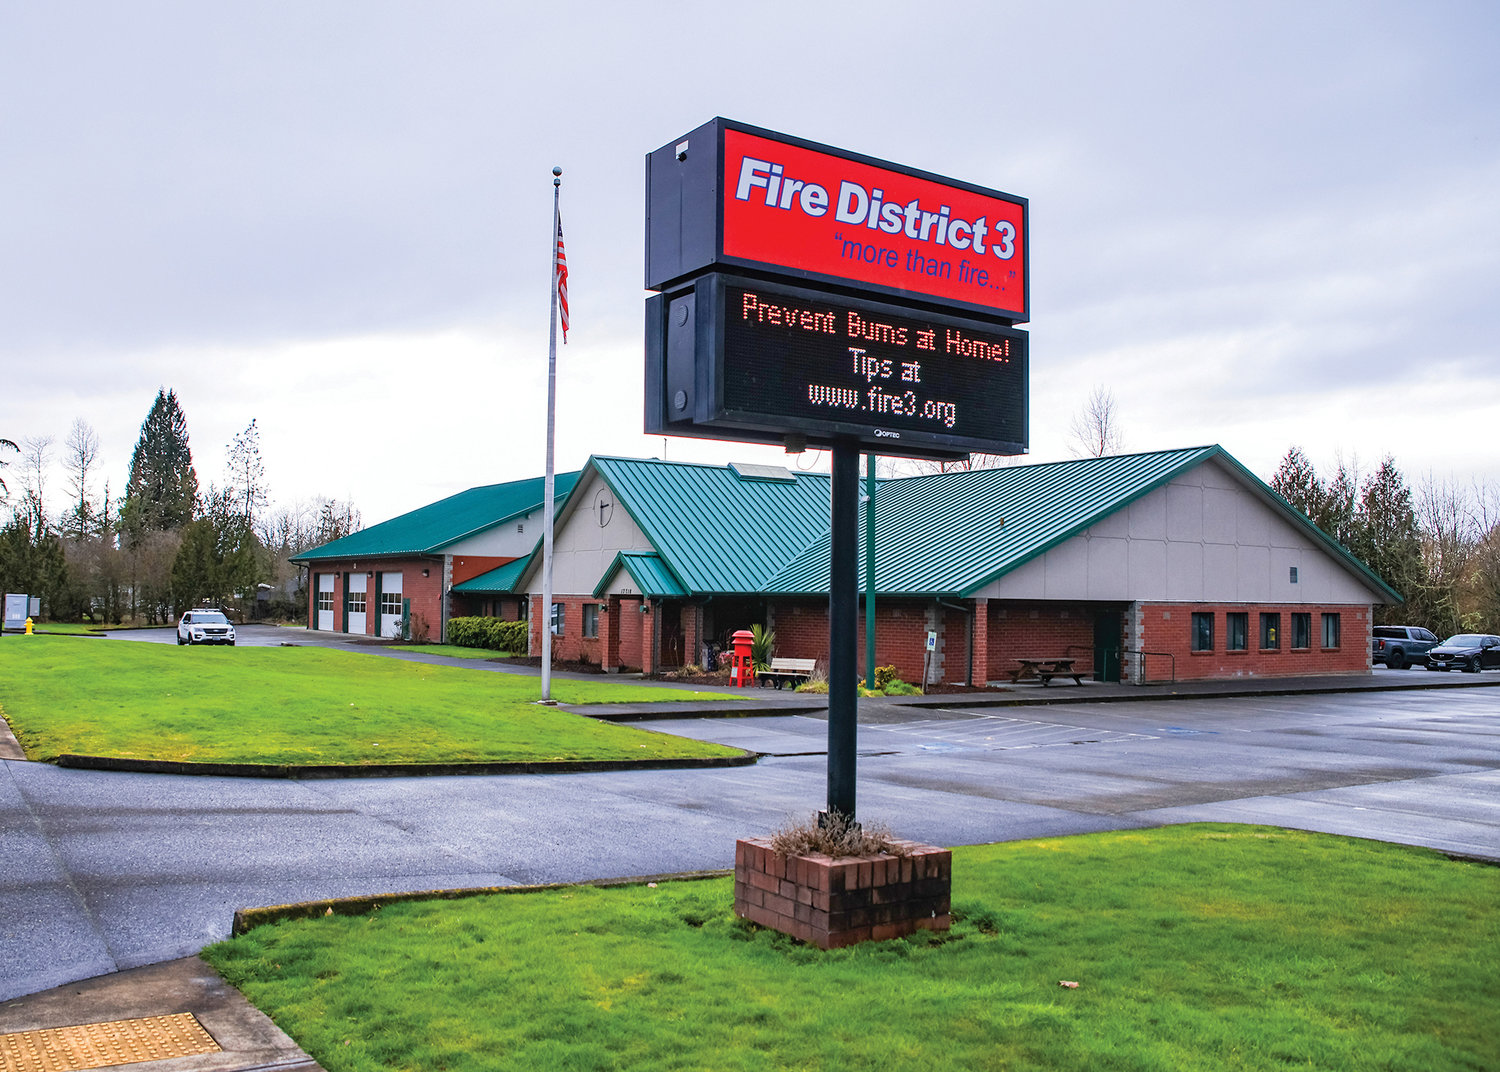 Clark County Fire District 3’s Station 31 headquarters is pictured in Hockinson on Monday, Feb. 27.